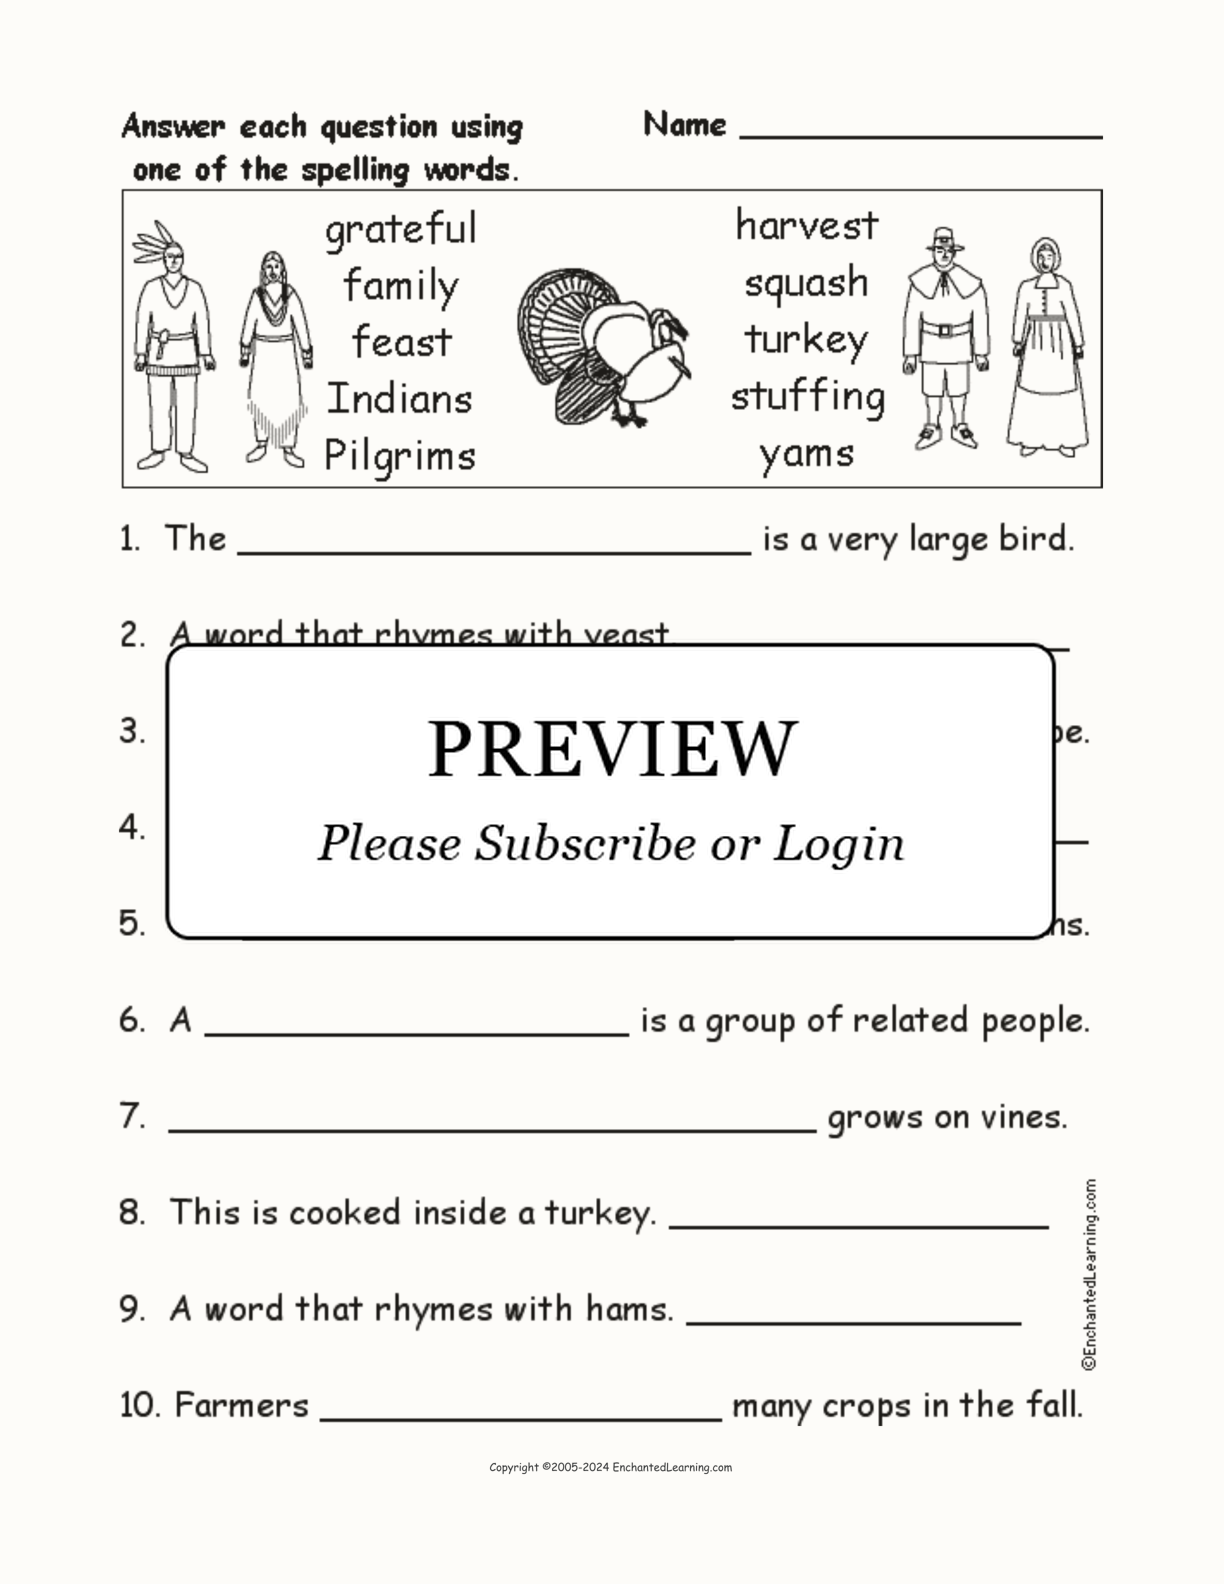 Thanksgiving Spelling Word Questions interactive worksheet page 1